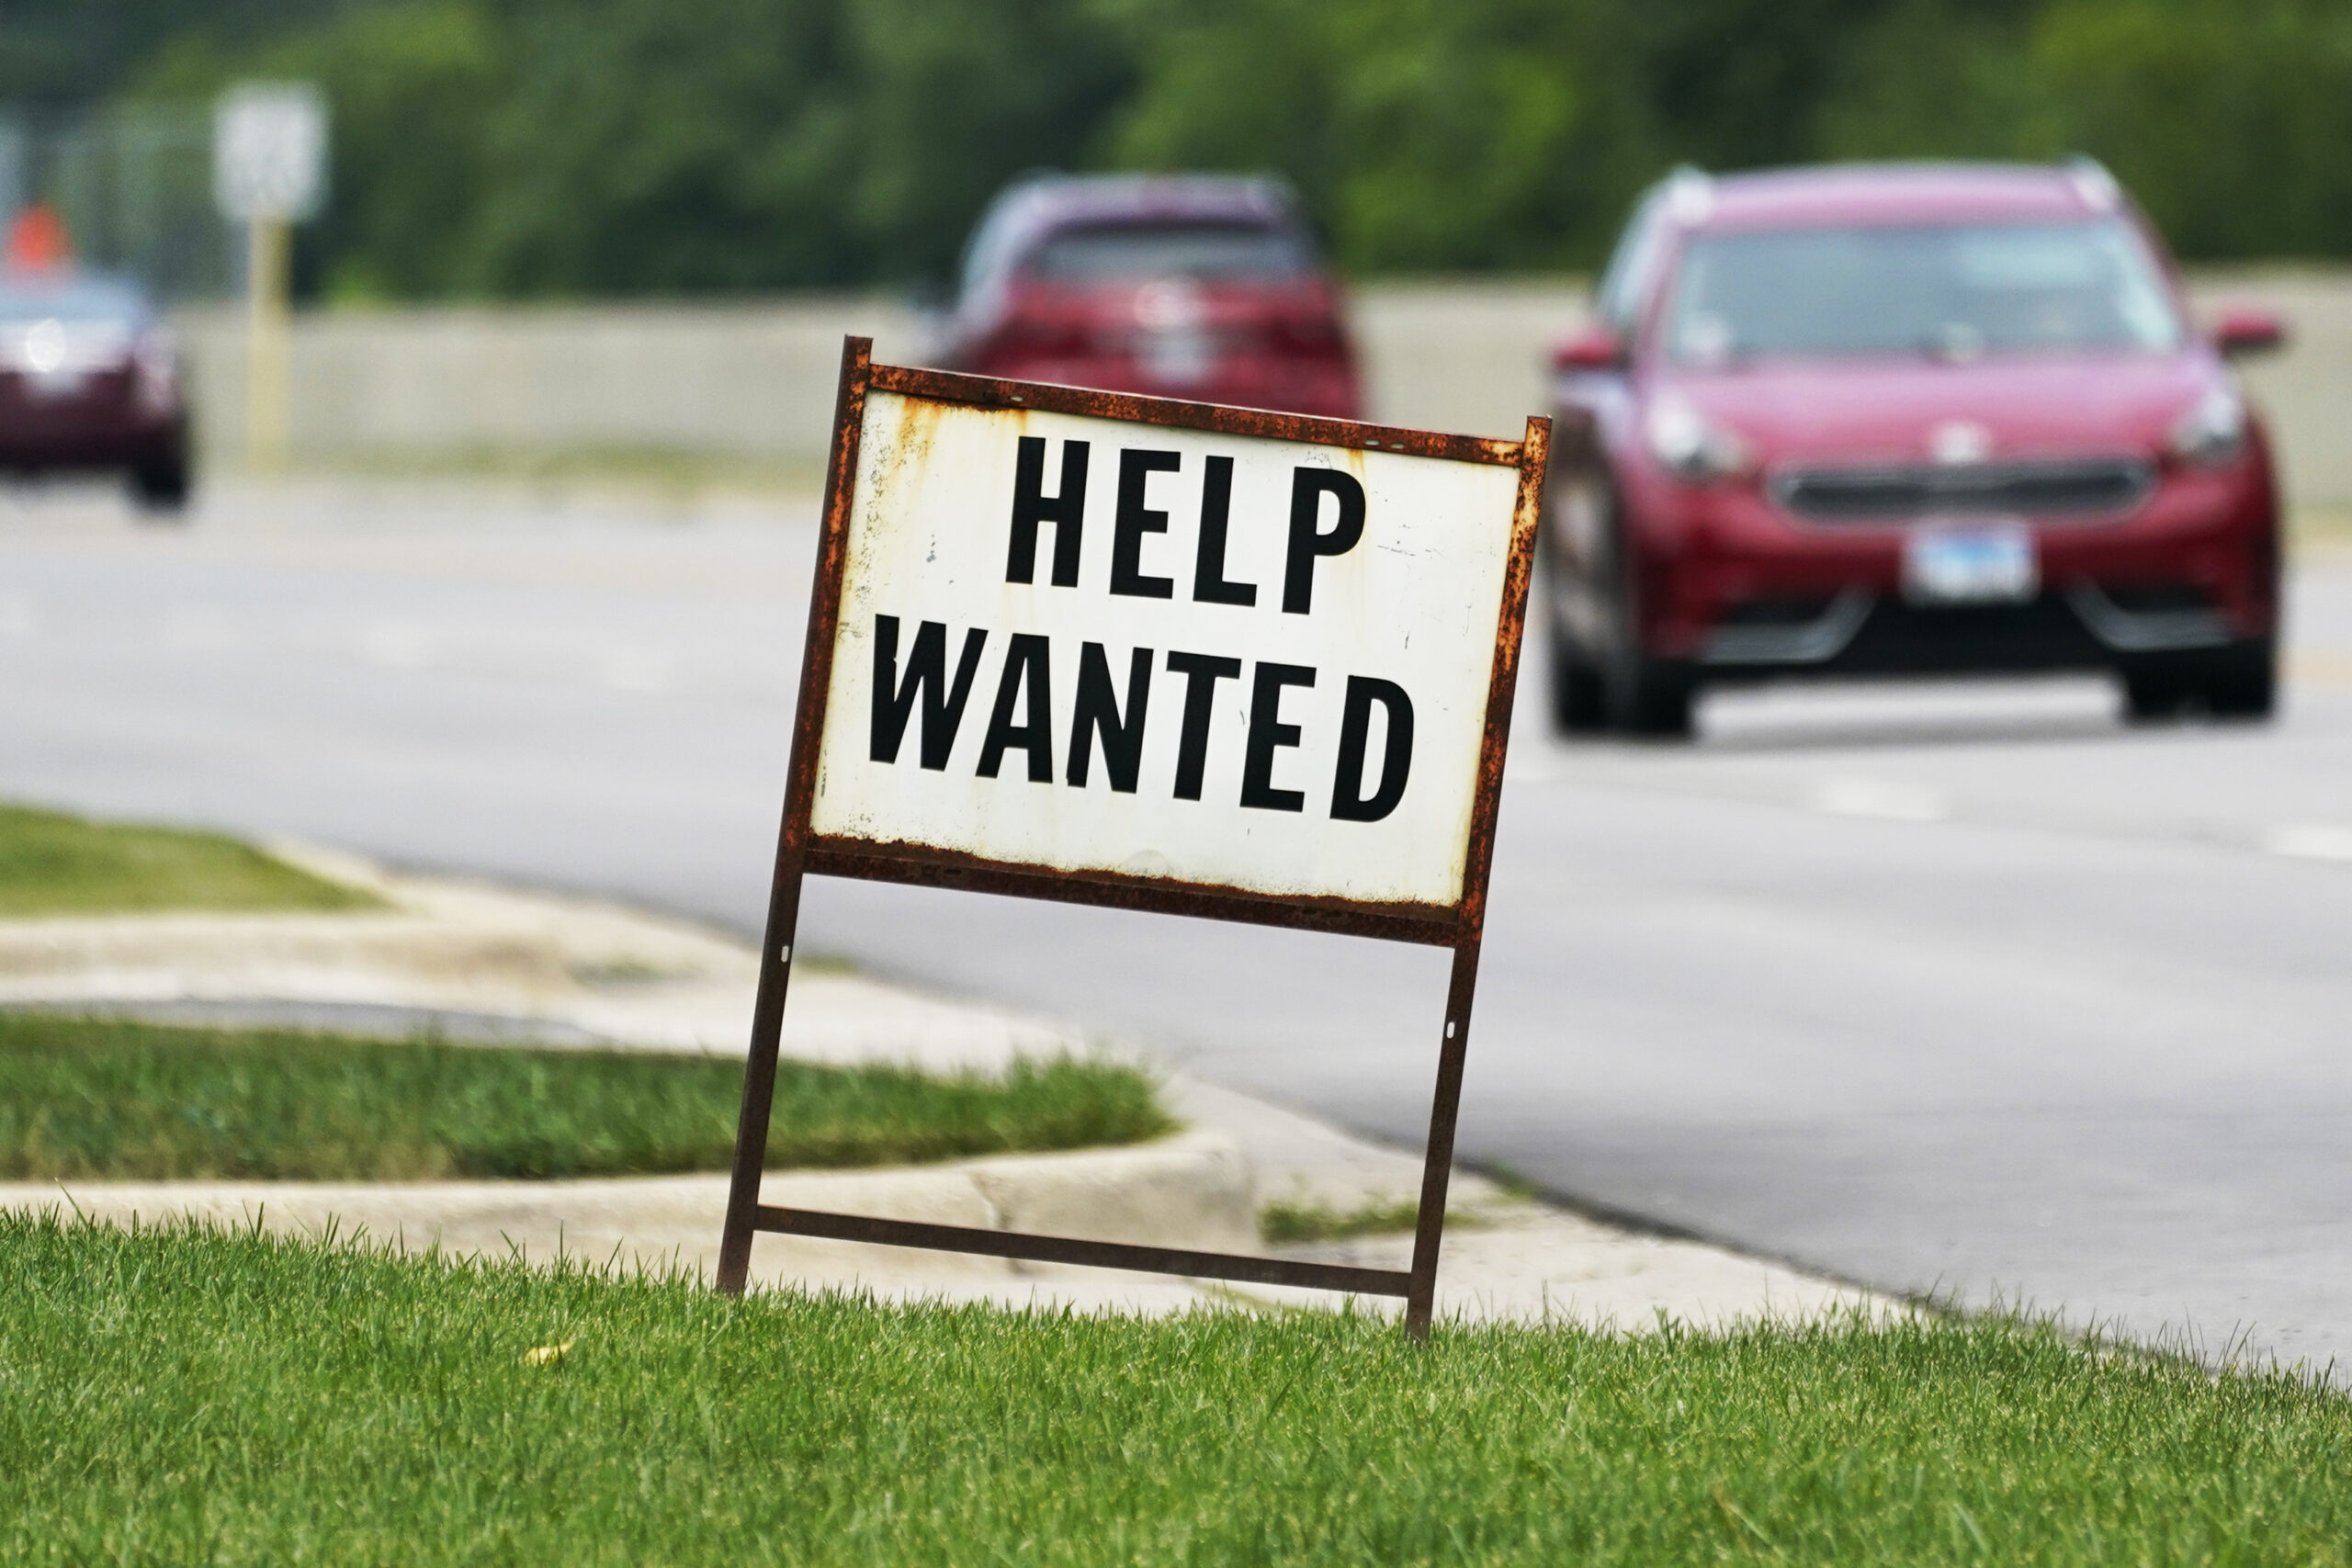 FILE - A help wanted sign is displayed at a gas station in Mount Prospect, Ill., Tuesday, July 27, 2021. Fewer Americans applied for unemployment benefits last week as layoffs remain at historically low levels. Jobless claims fell by 5,000 to 166,000 for the week ending April 2, 2022 the Labor Department reported Thursday. (AP Photo/Nam Y. Huh)